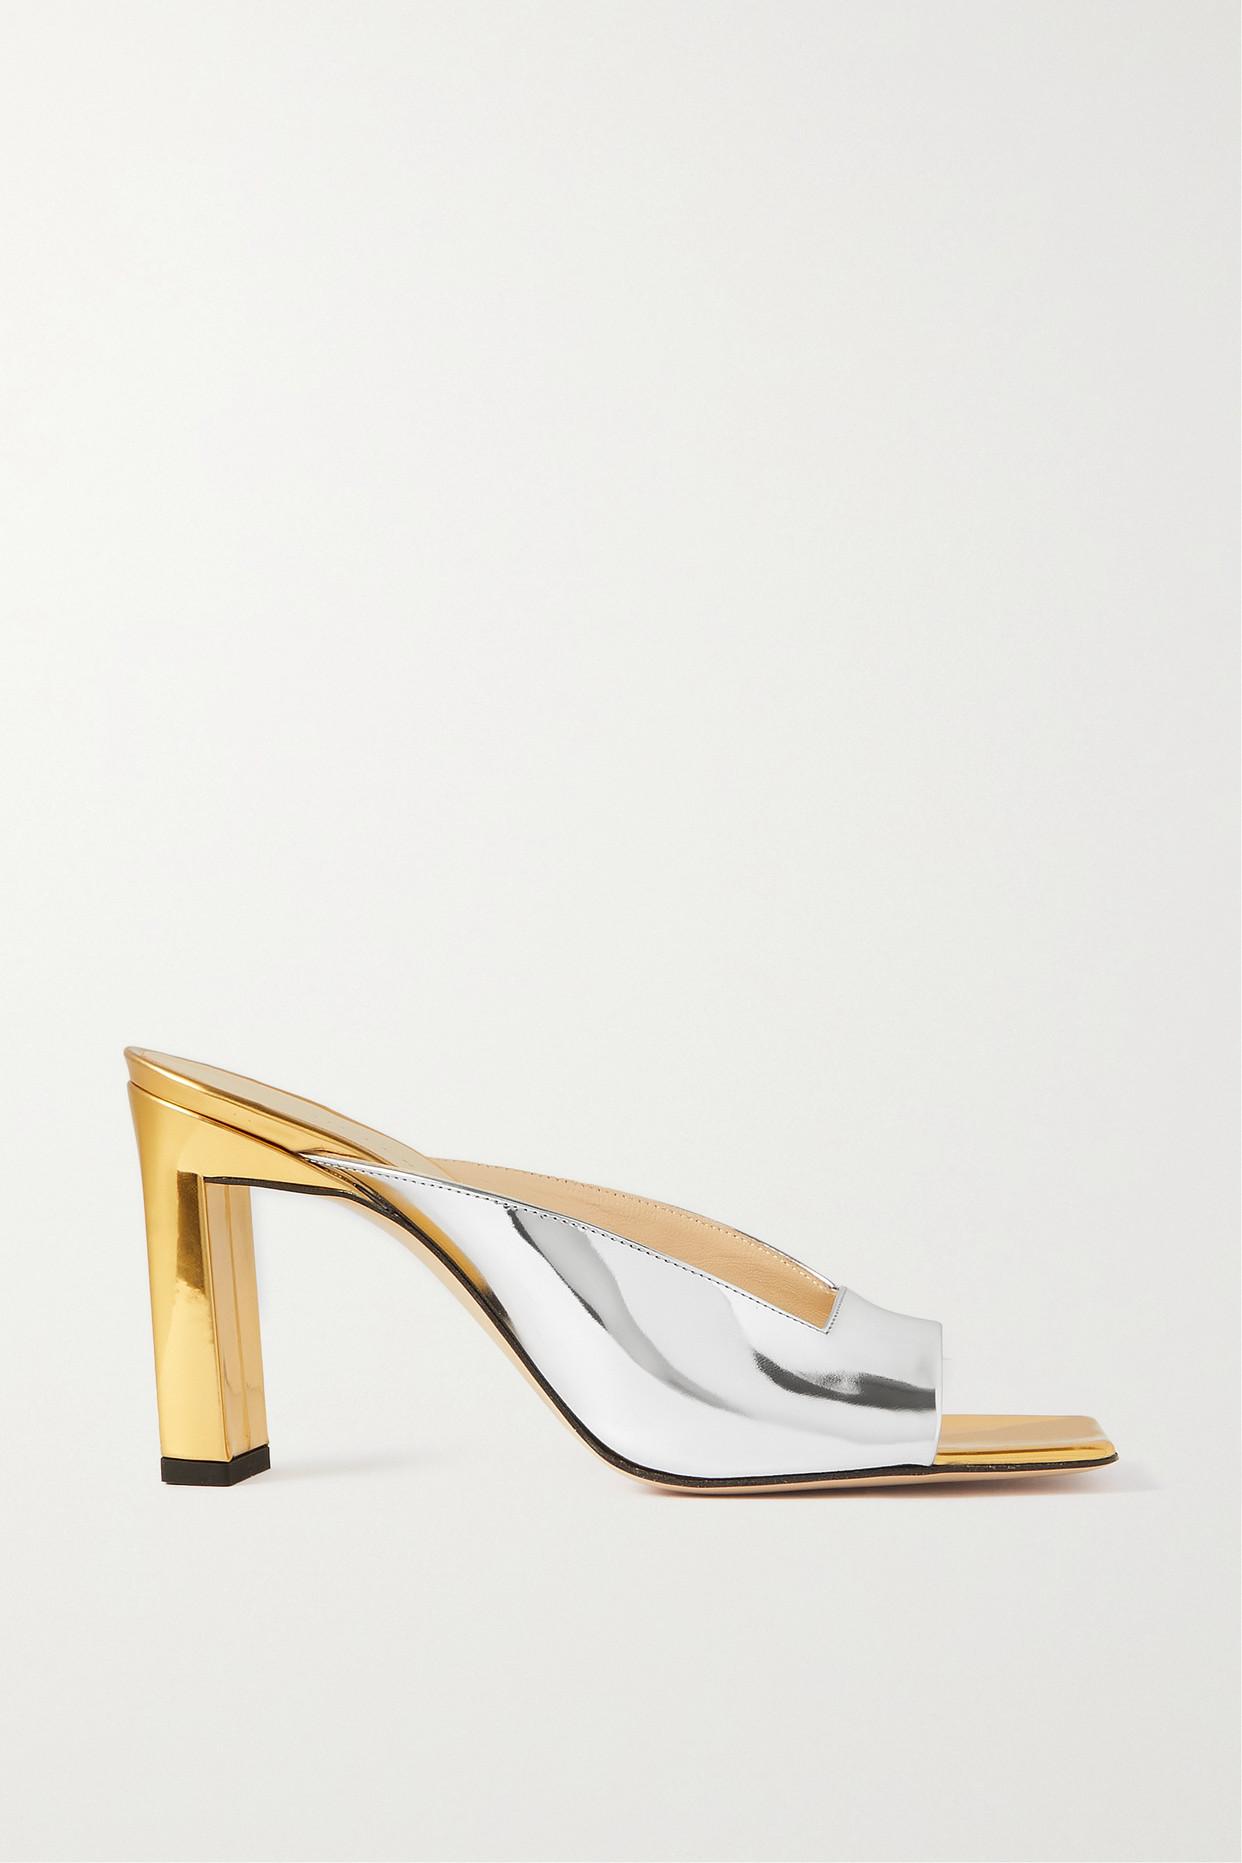 Wandler Isa Two-tone Metallic Leather Mules in Natural | Lyst UK